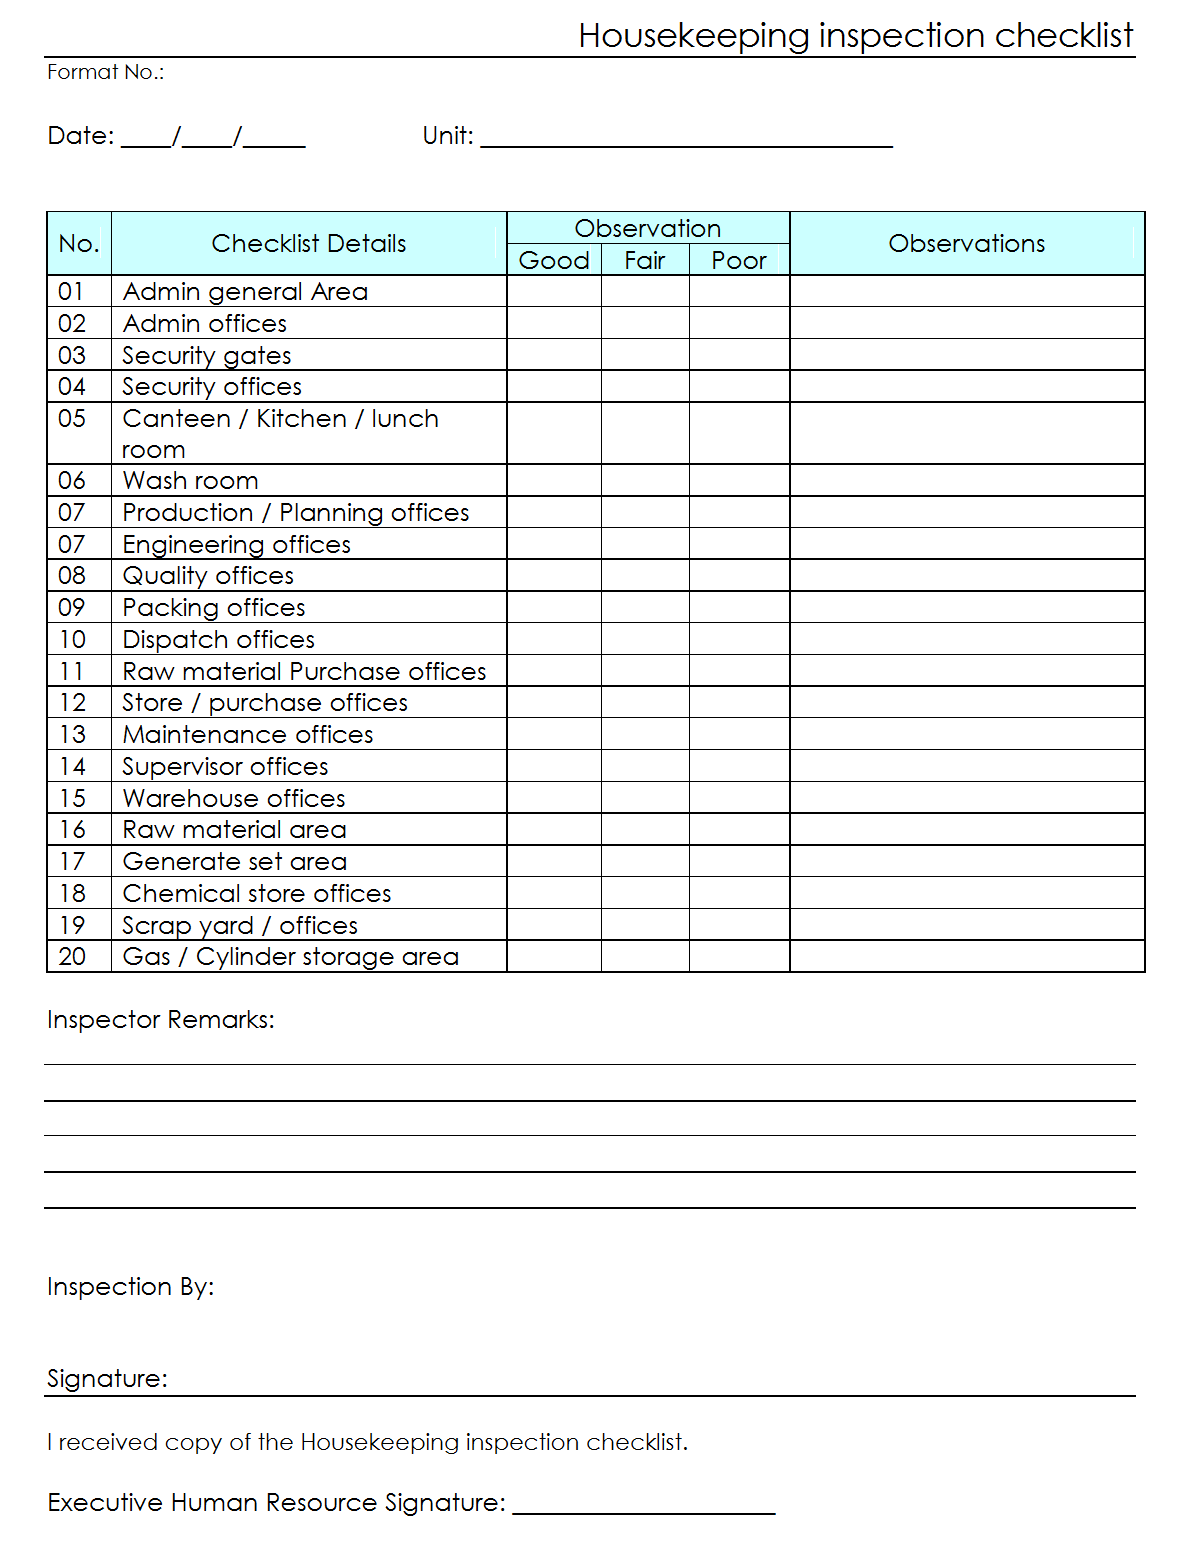 Workplace housekeeping inspection checklist for factory Regarding Warehouse Safety Inspection Checklist Template With Warehouse Safety Inspection Checklist Template